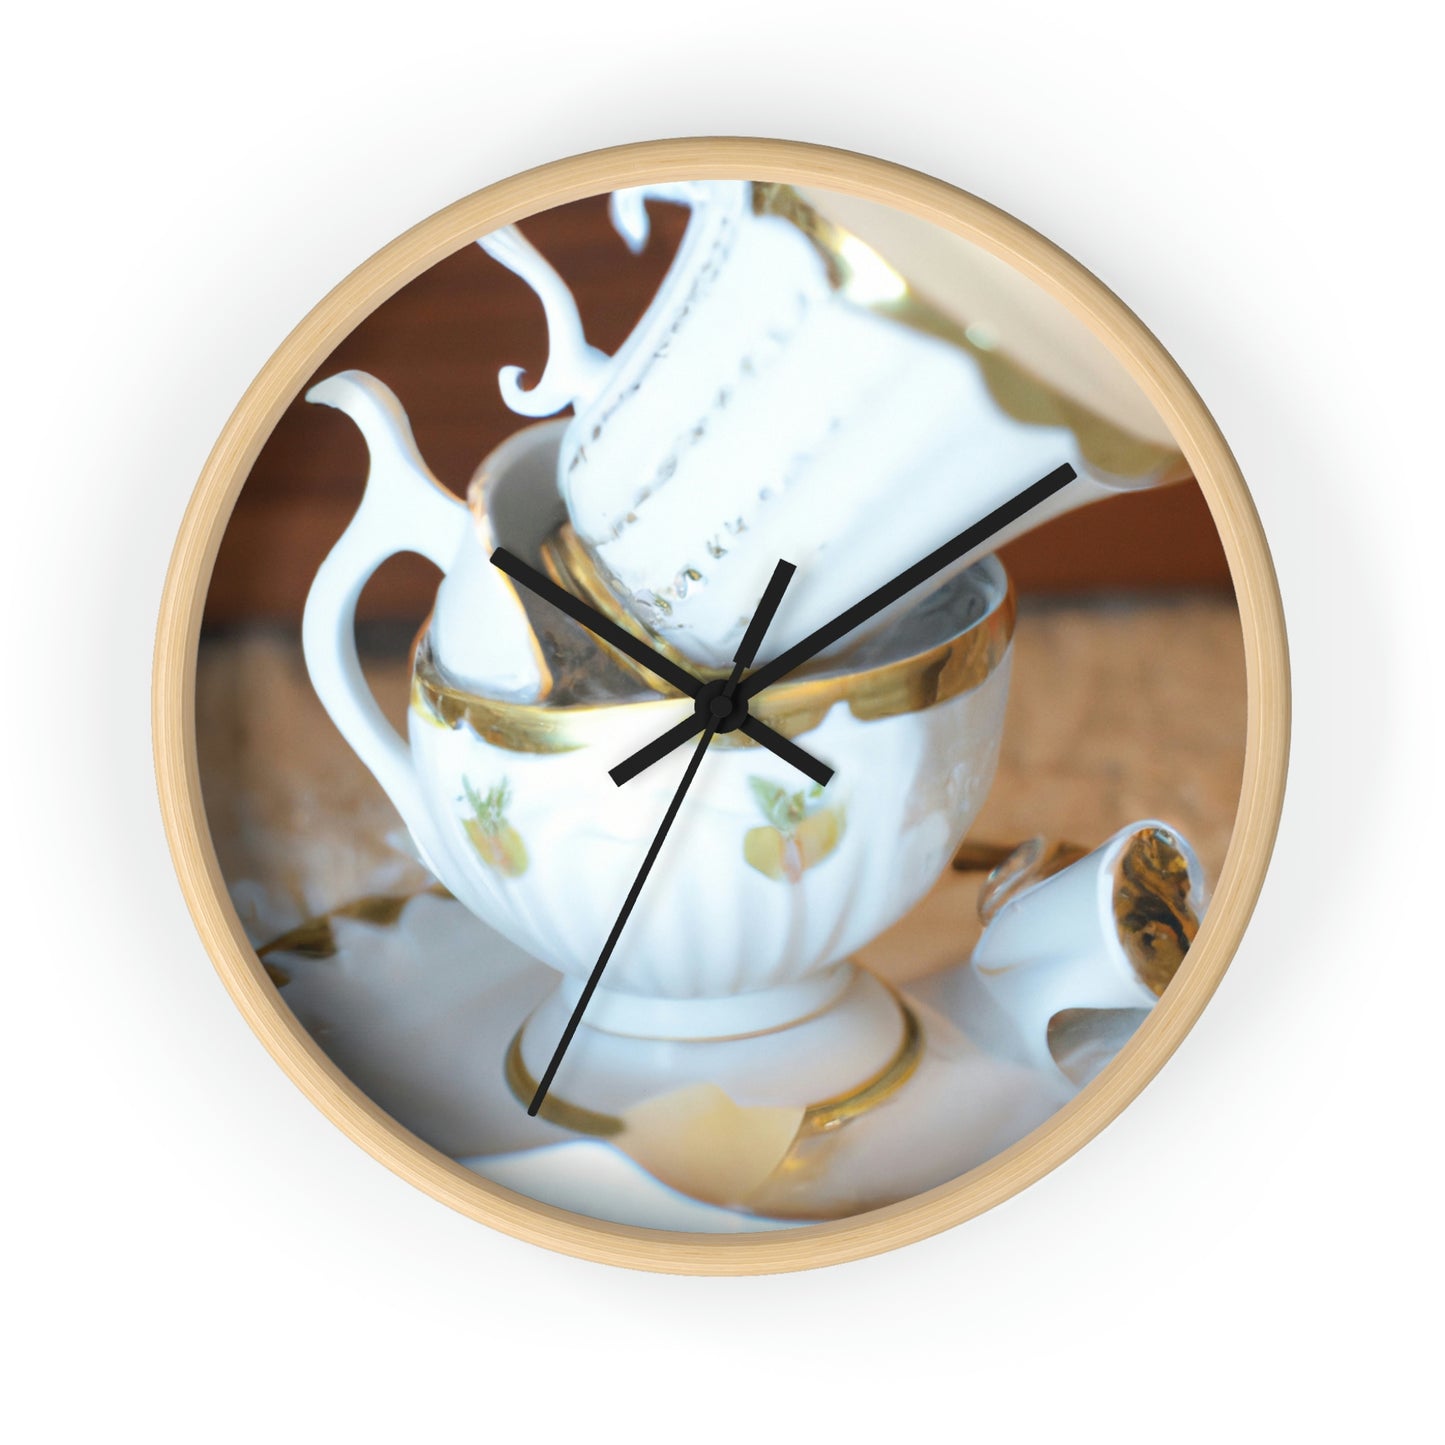 "A Cup of Comfort" - The Alien Wall Clock